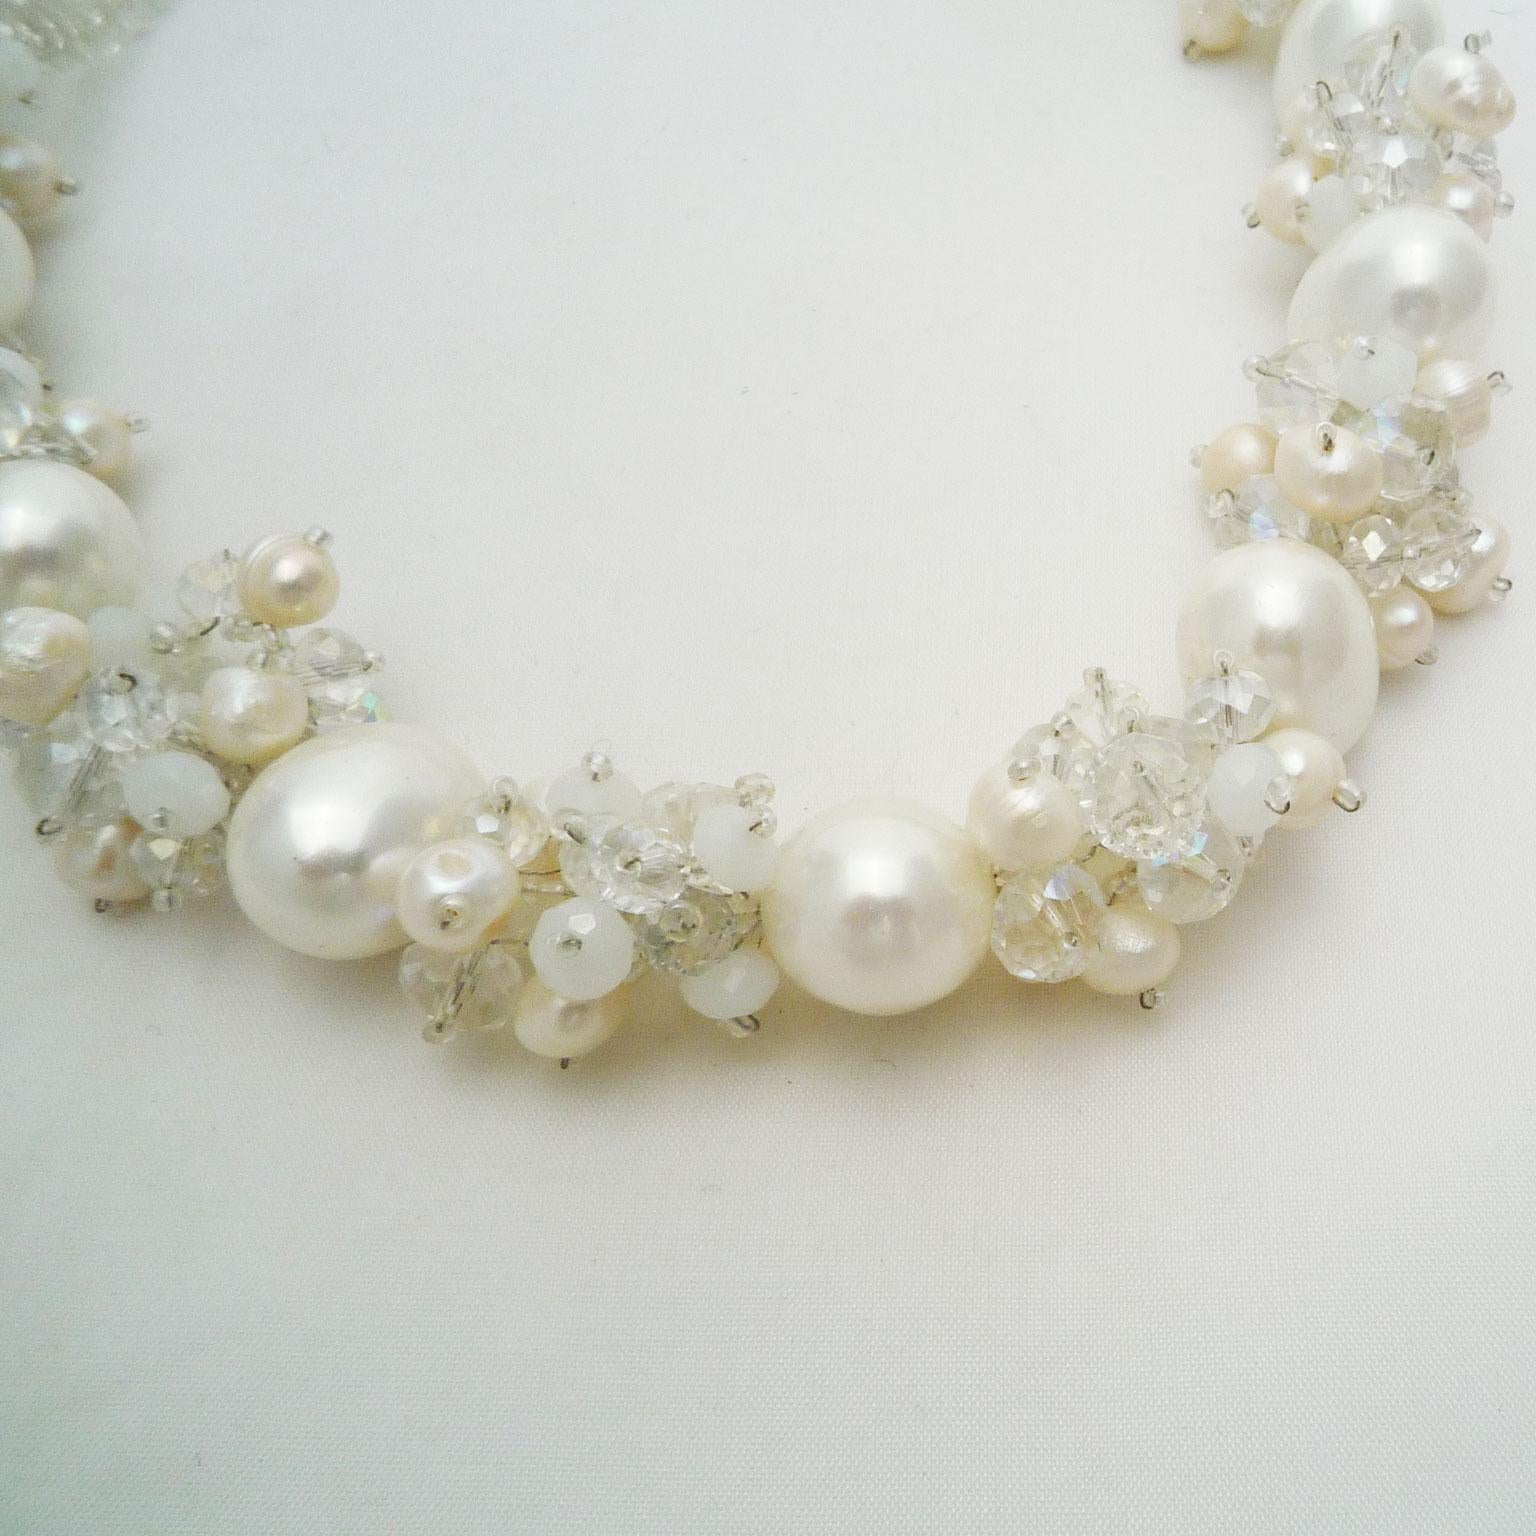 Necklace of Swarovski pearls and freshwater pearls 
Handmade chain in light color.

This necklace made of Swarovsky pearls was made of large pearls and smaller freshwater pearls artfully together. Hand knotted.
Modern design object.
Chain length 50